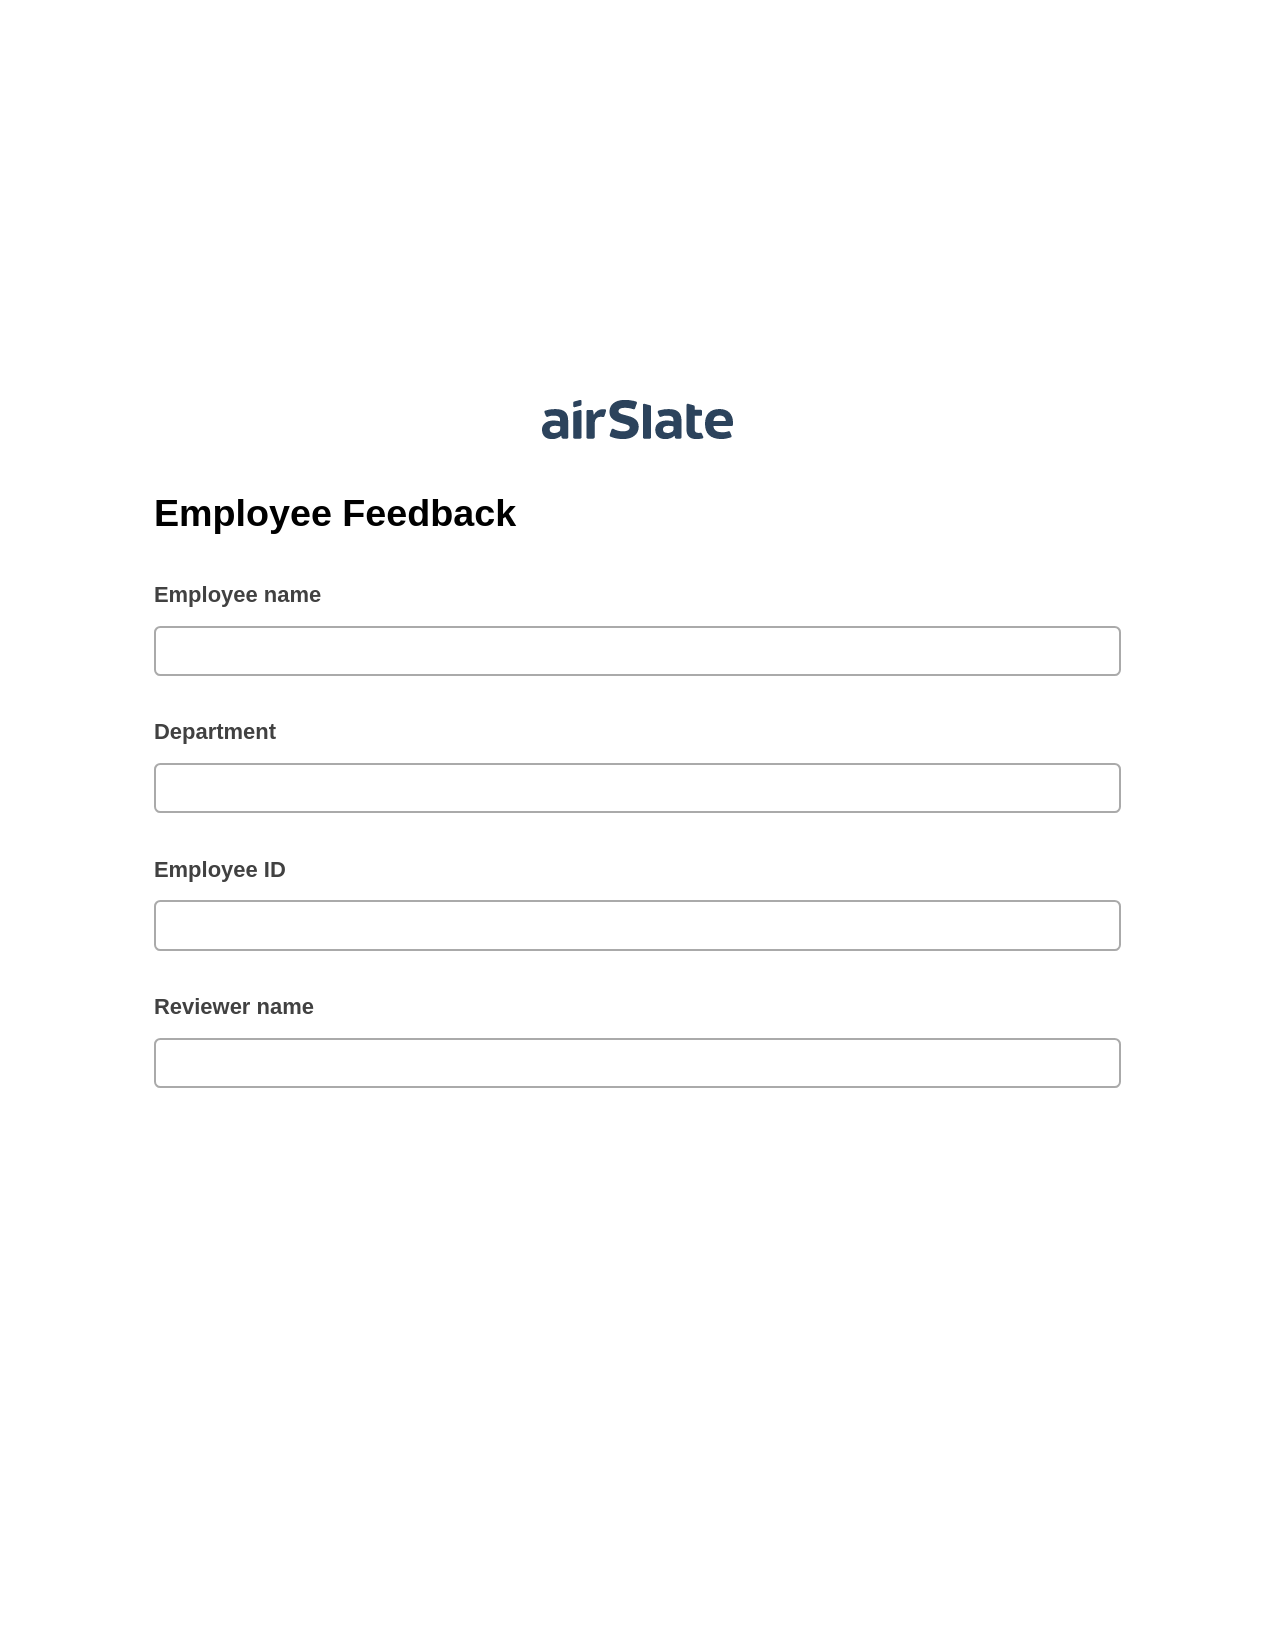 Multirole Employee Feedback Pre-fill from CSV File Bot, Send a Slate to Salesforce Contact Bot, Archive to SharePoint Folder Bot